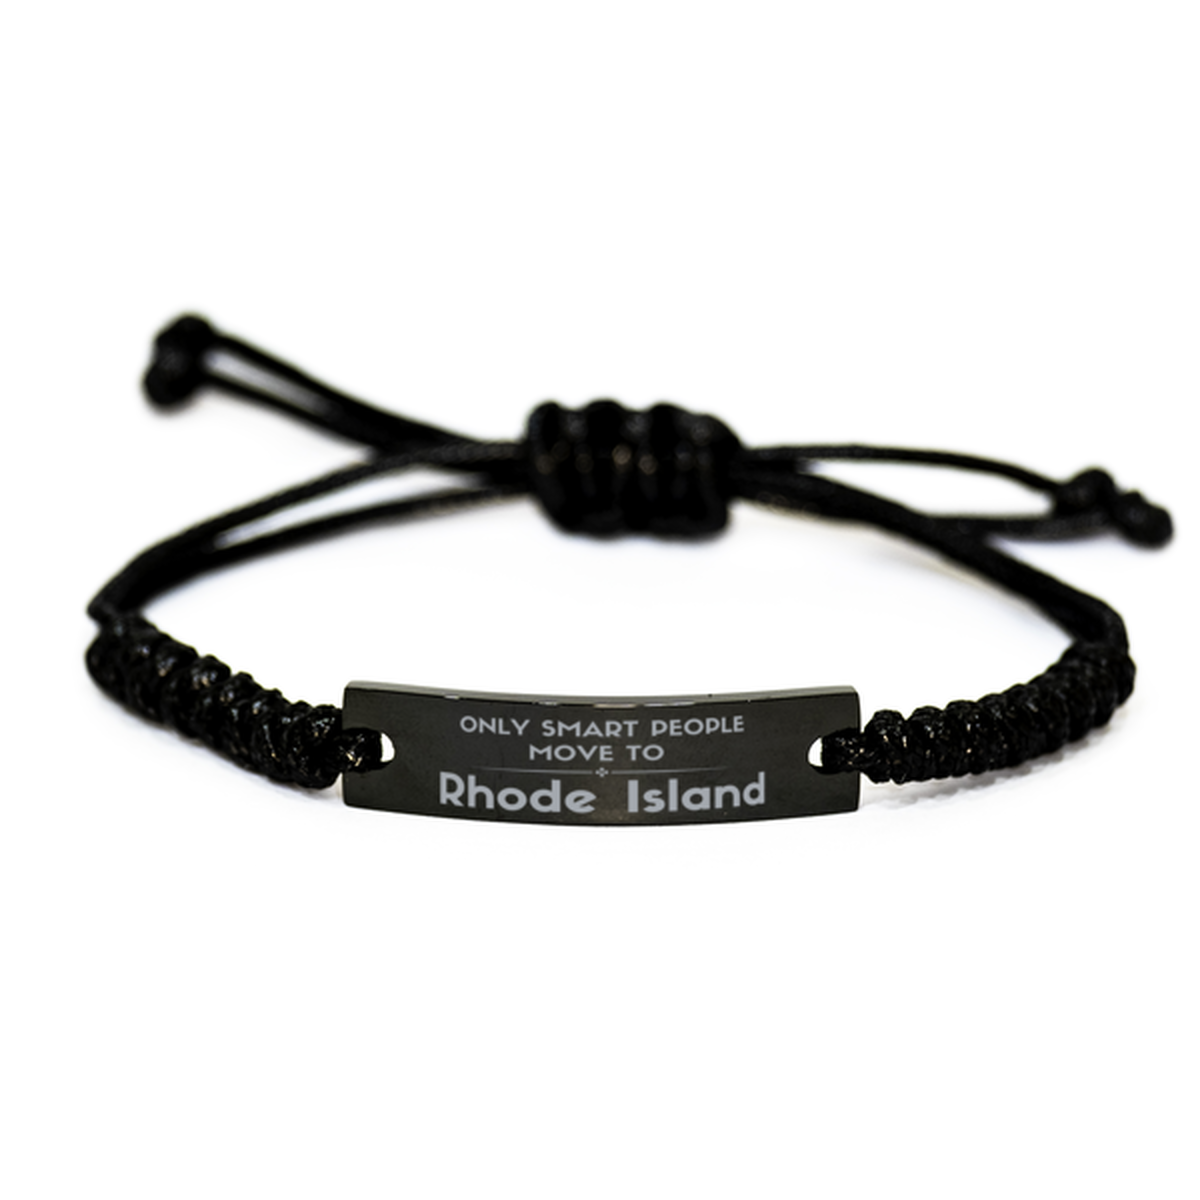 Only smart people move to Rhode Island Black Rope Bracelet, Gag Gifts For Rhode Island, Move to Rhode Island Gifts for Friends Coworker Funny Saying Quote